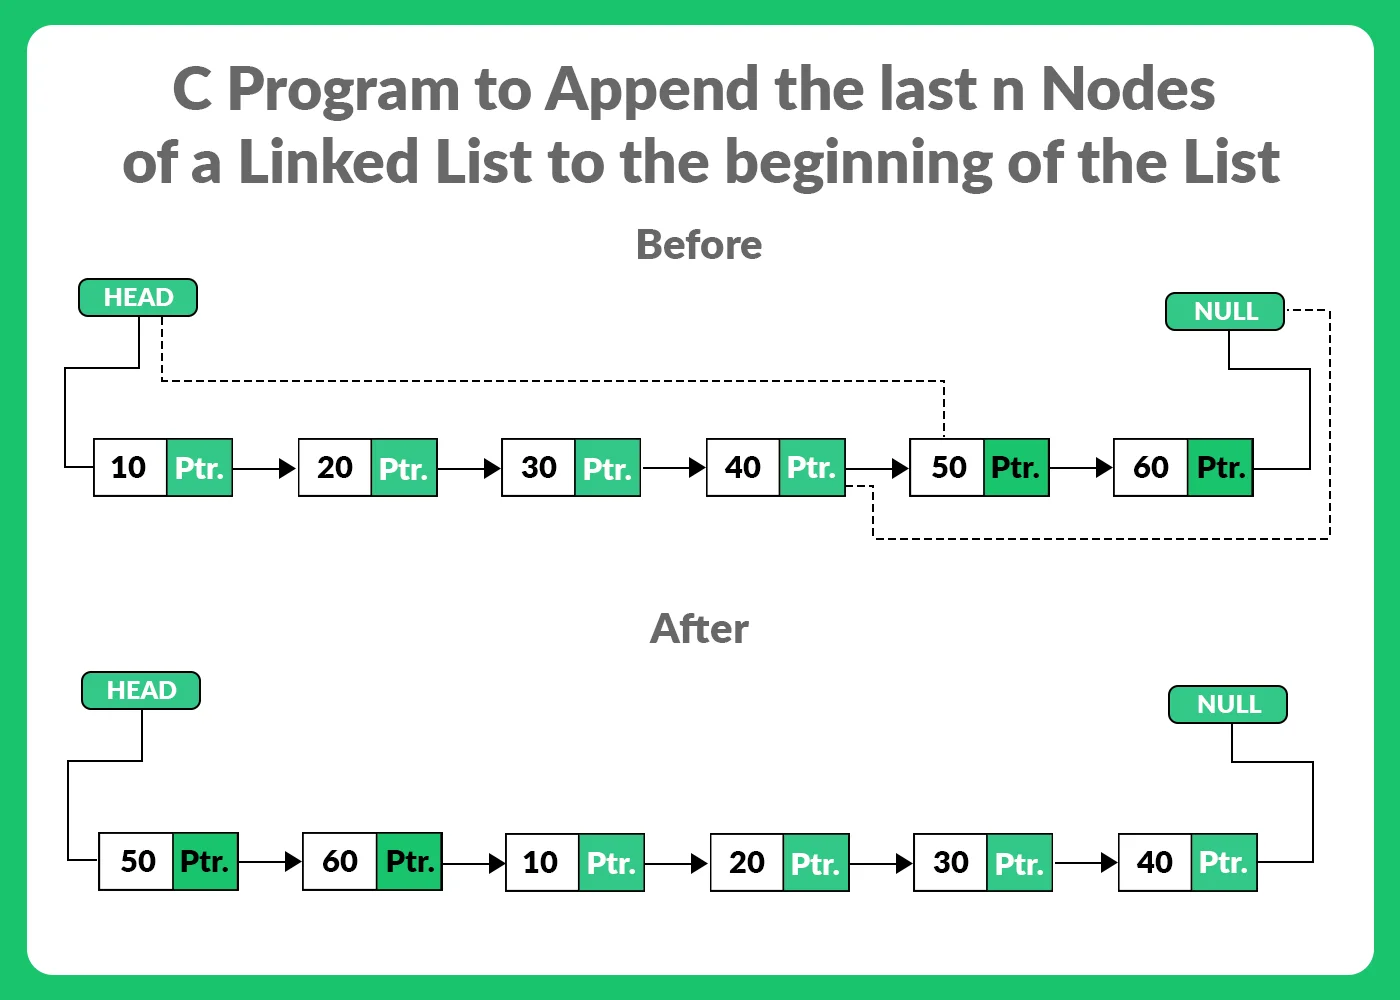 C Program to move the last node of a linked list to the beginning of the list